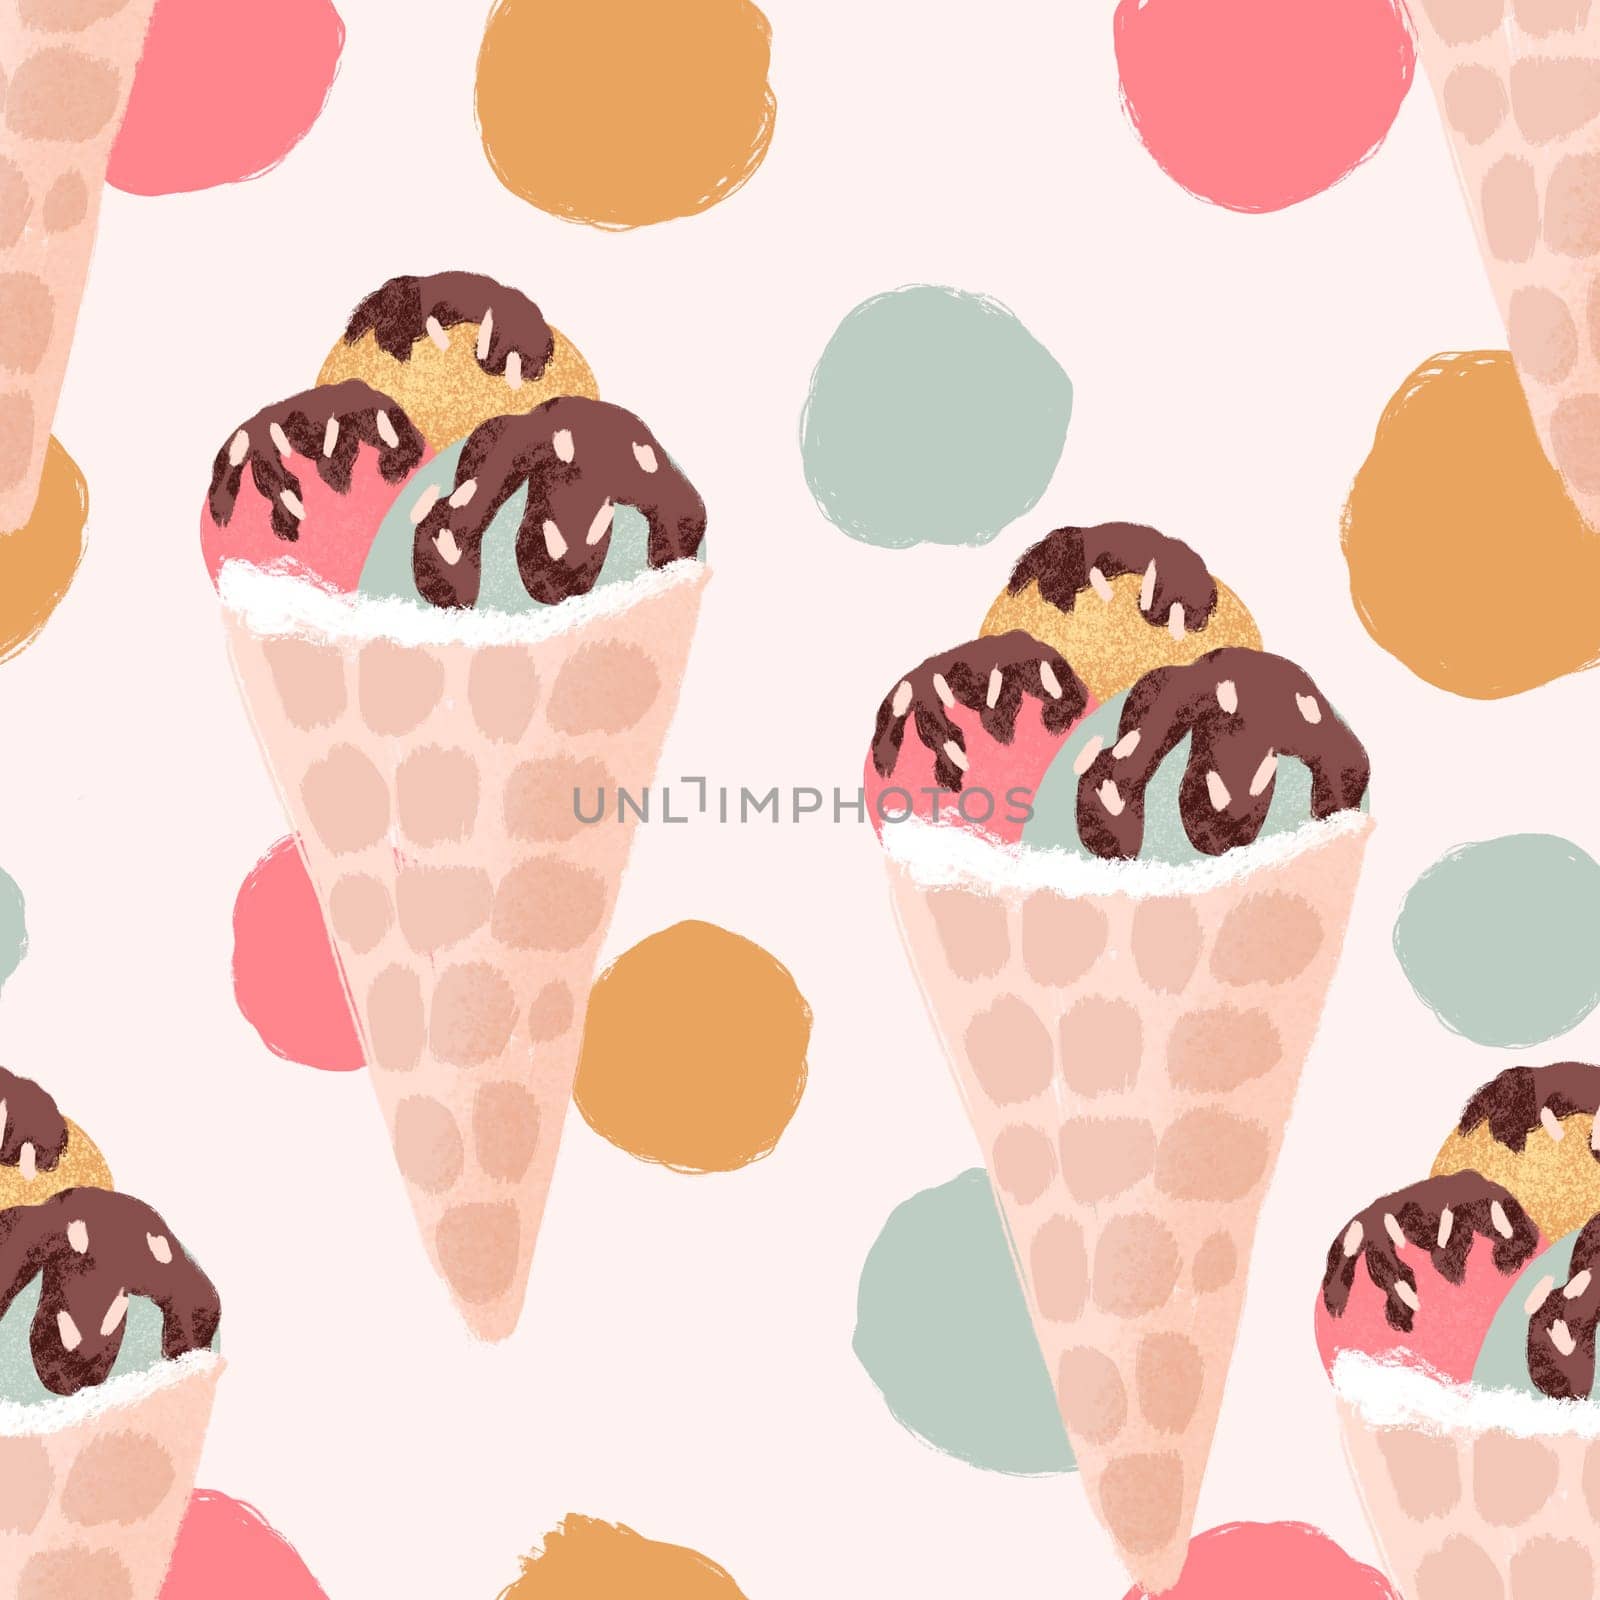 Hand drawn seamless pattern of ice cream in cup bowl, retro vintage style. Pink mint yellow round shape with chocolate, sweet tasty summer holiday food, fun design for colorful beach art